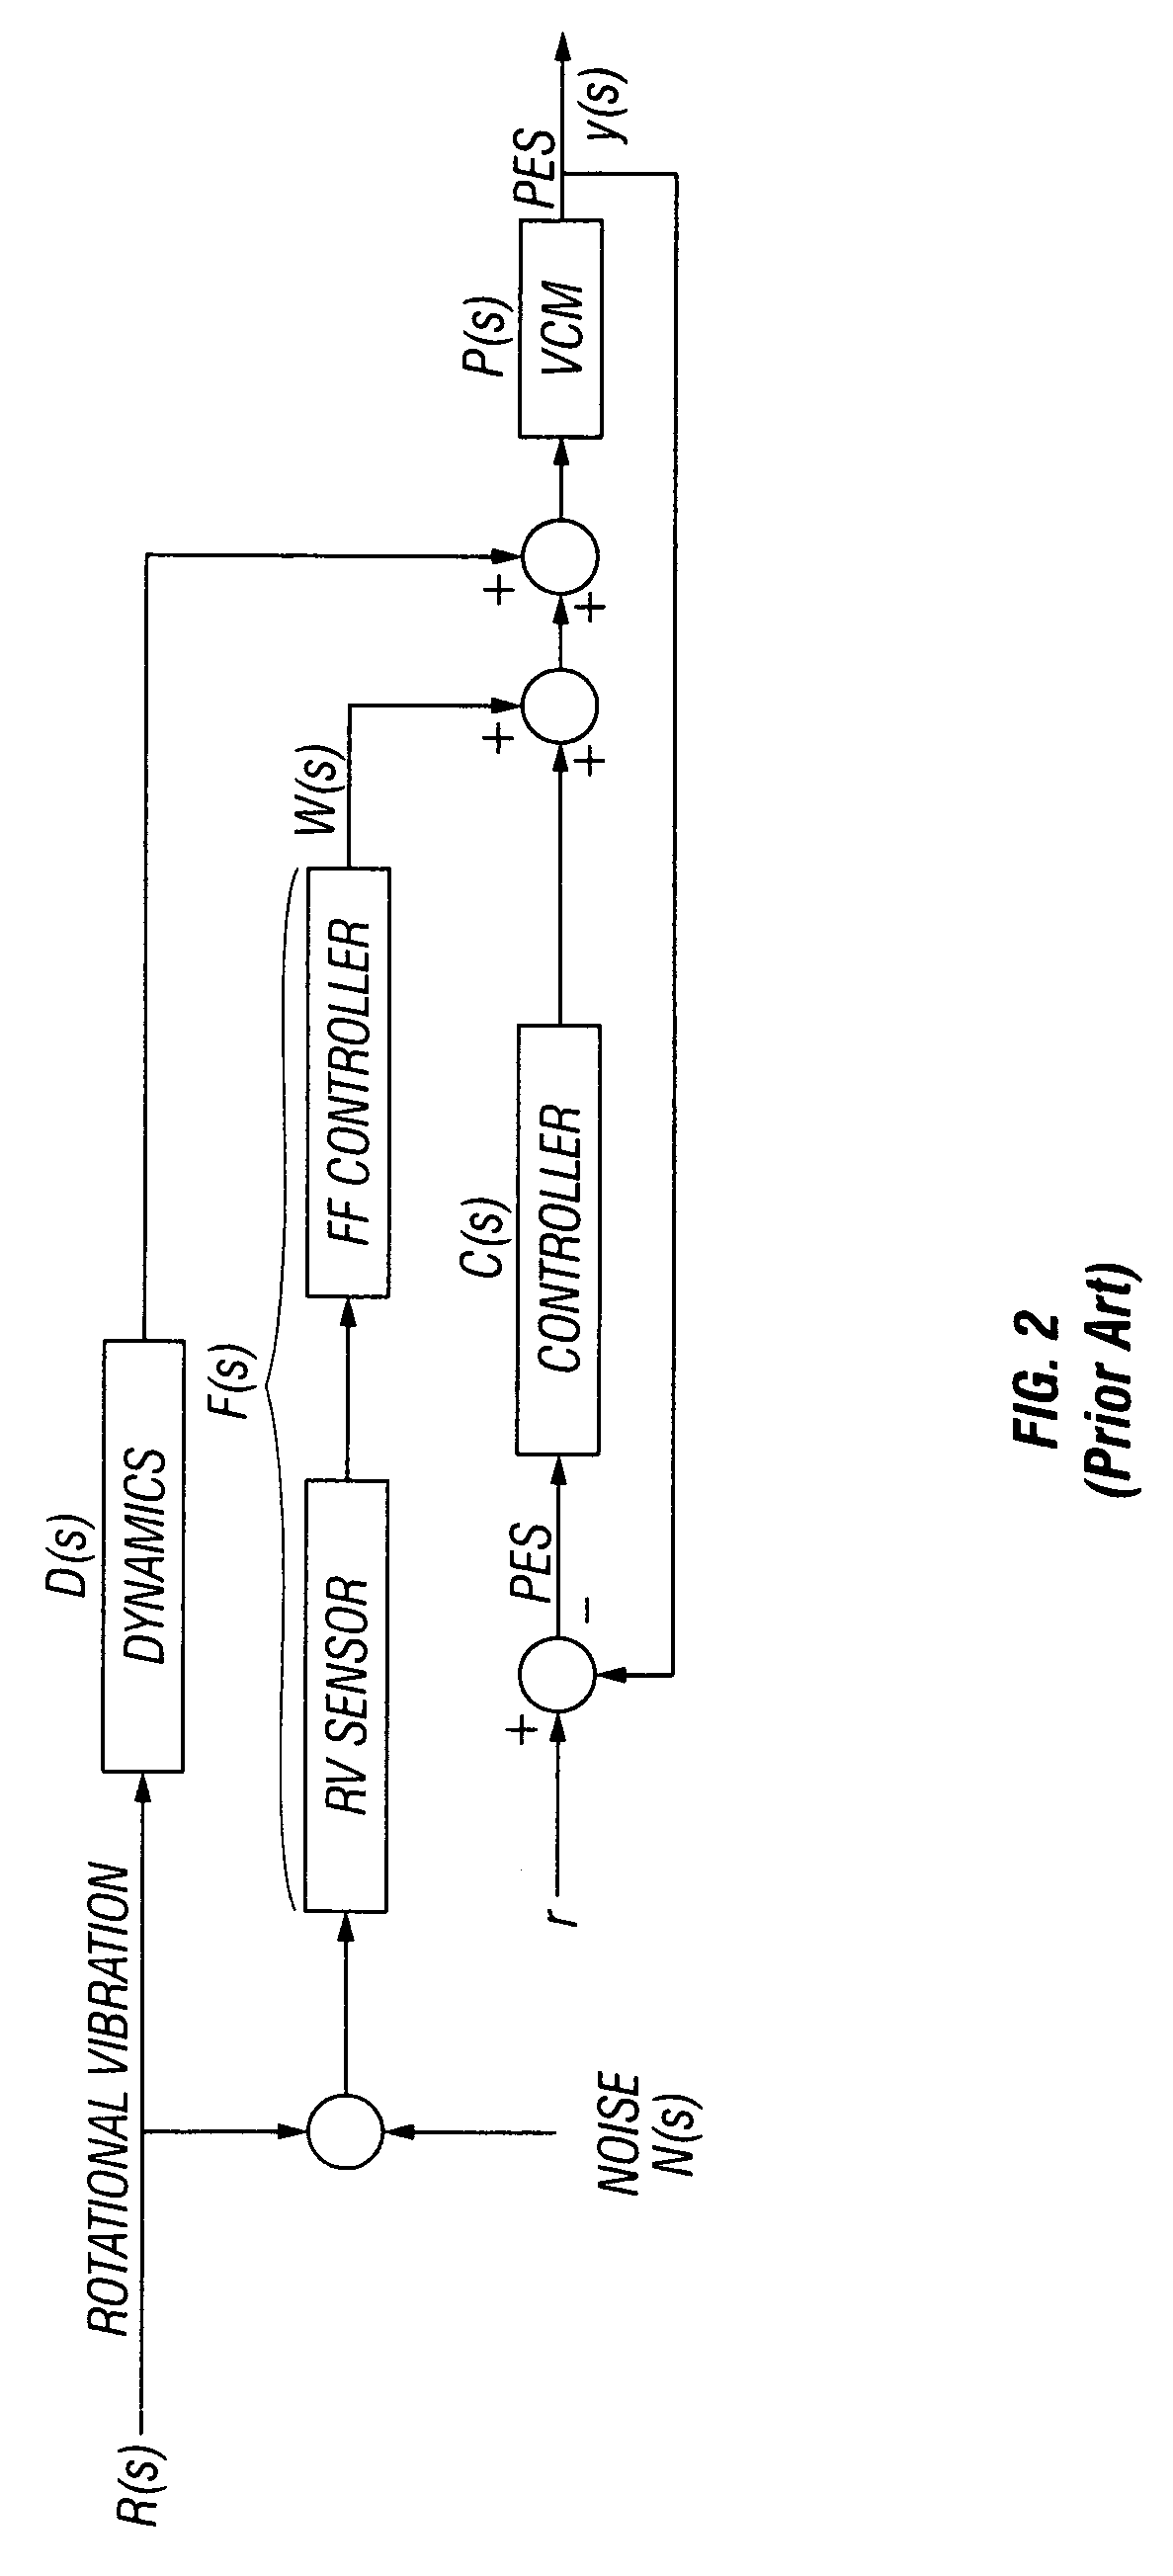 Magnetic recording disk drive with multiple feedforward controllers for rotational vibration cancellation